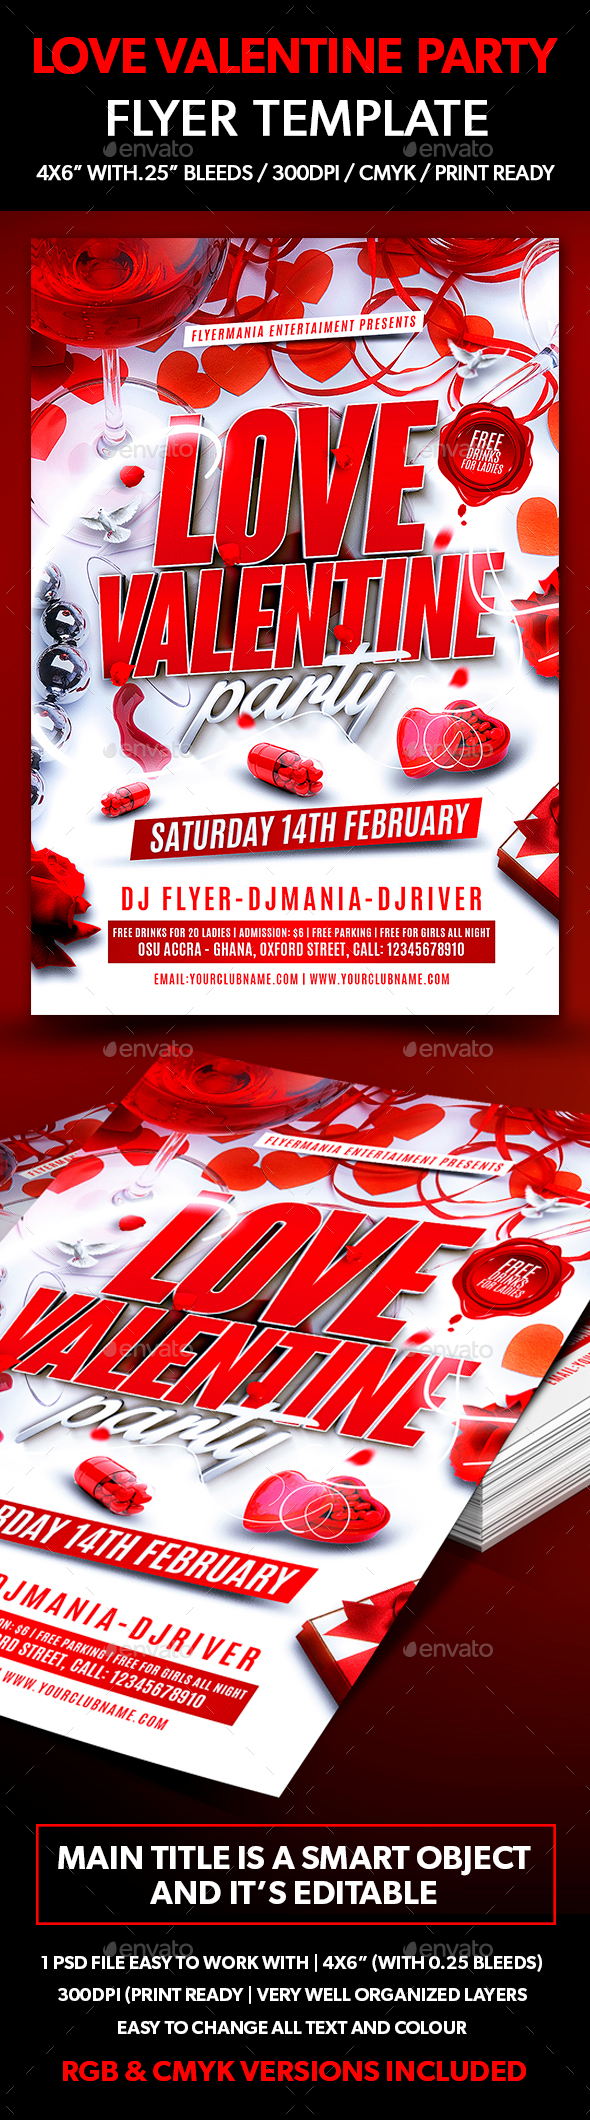 Love Valentine Party Flyer Template